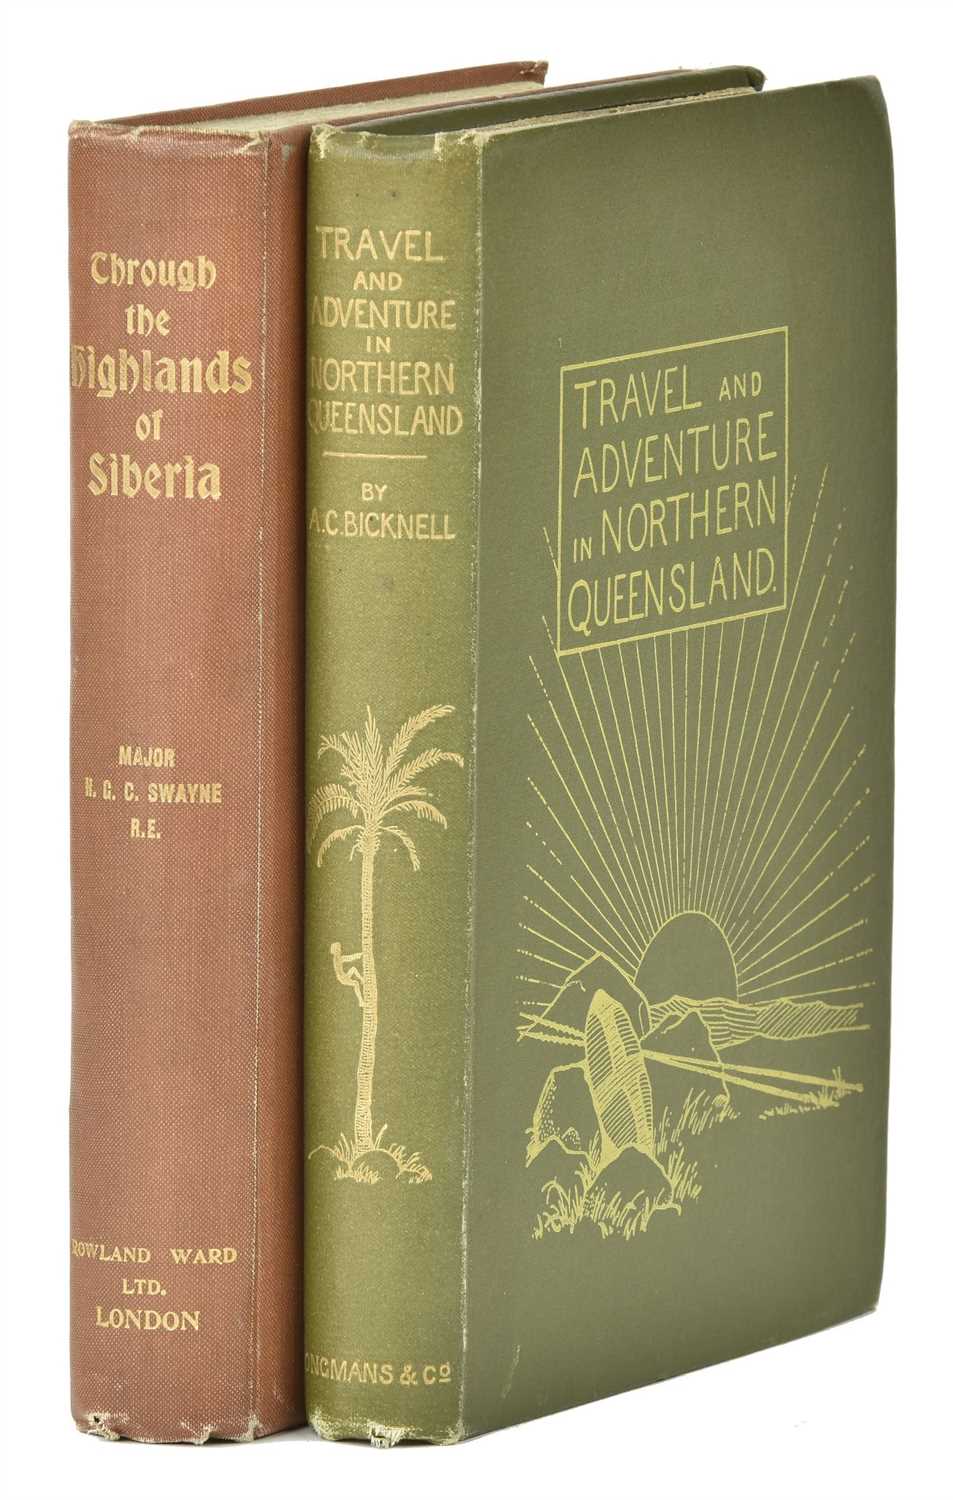 Lot 65 - Swayne (H. G. C.). Through the Highlands of Siberia, 1st edition, 1904, & 1 other